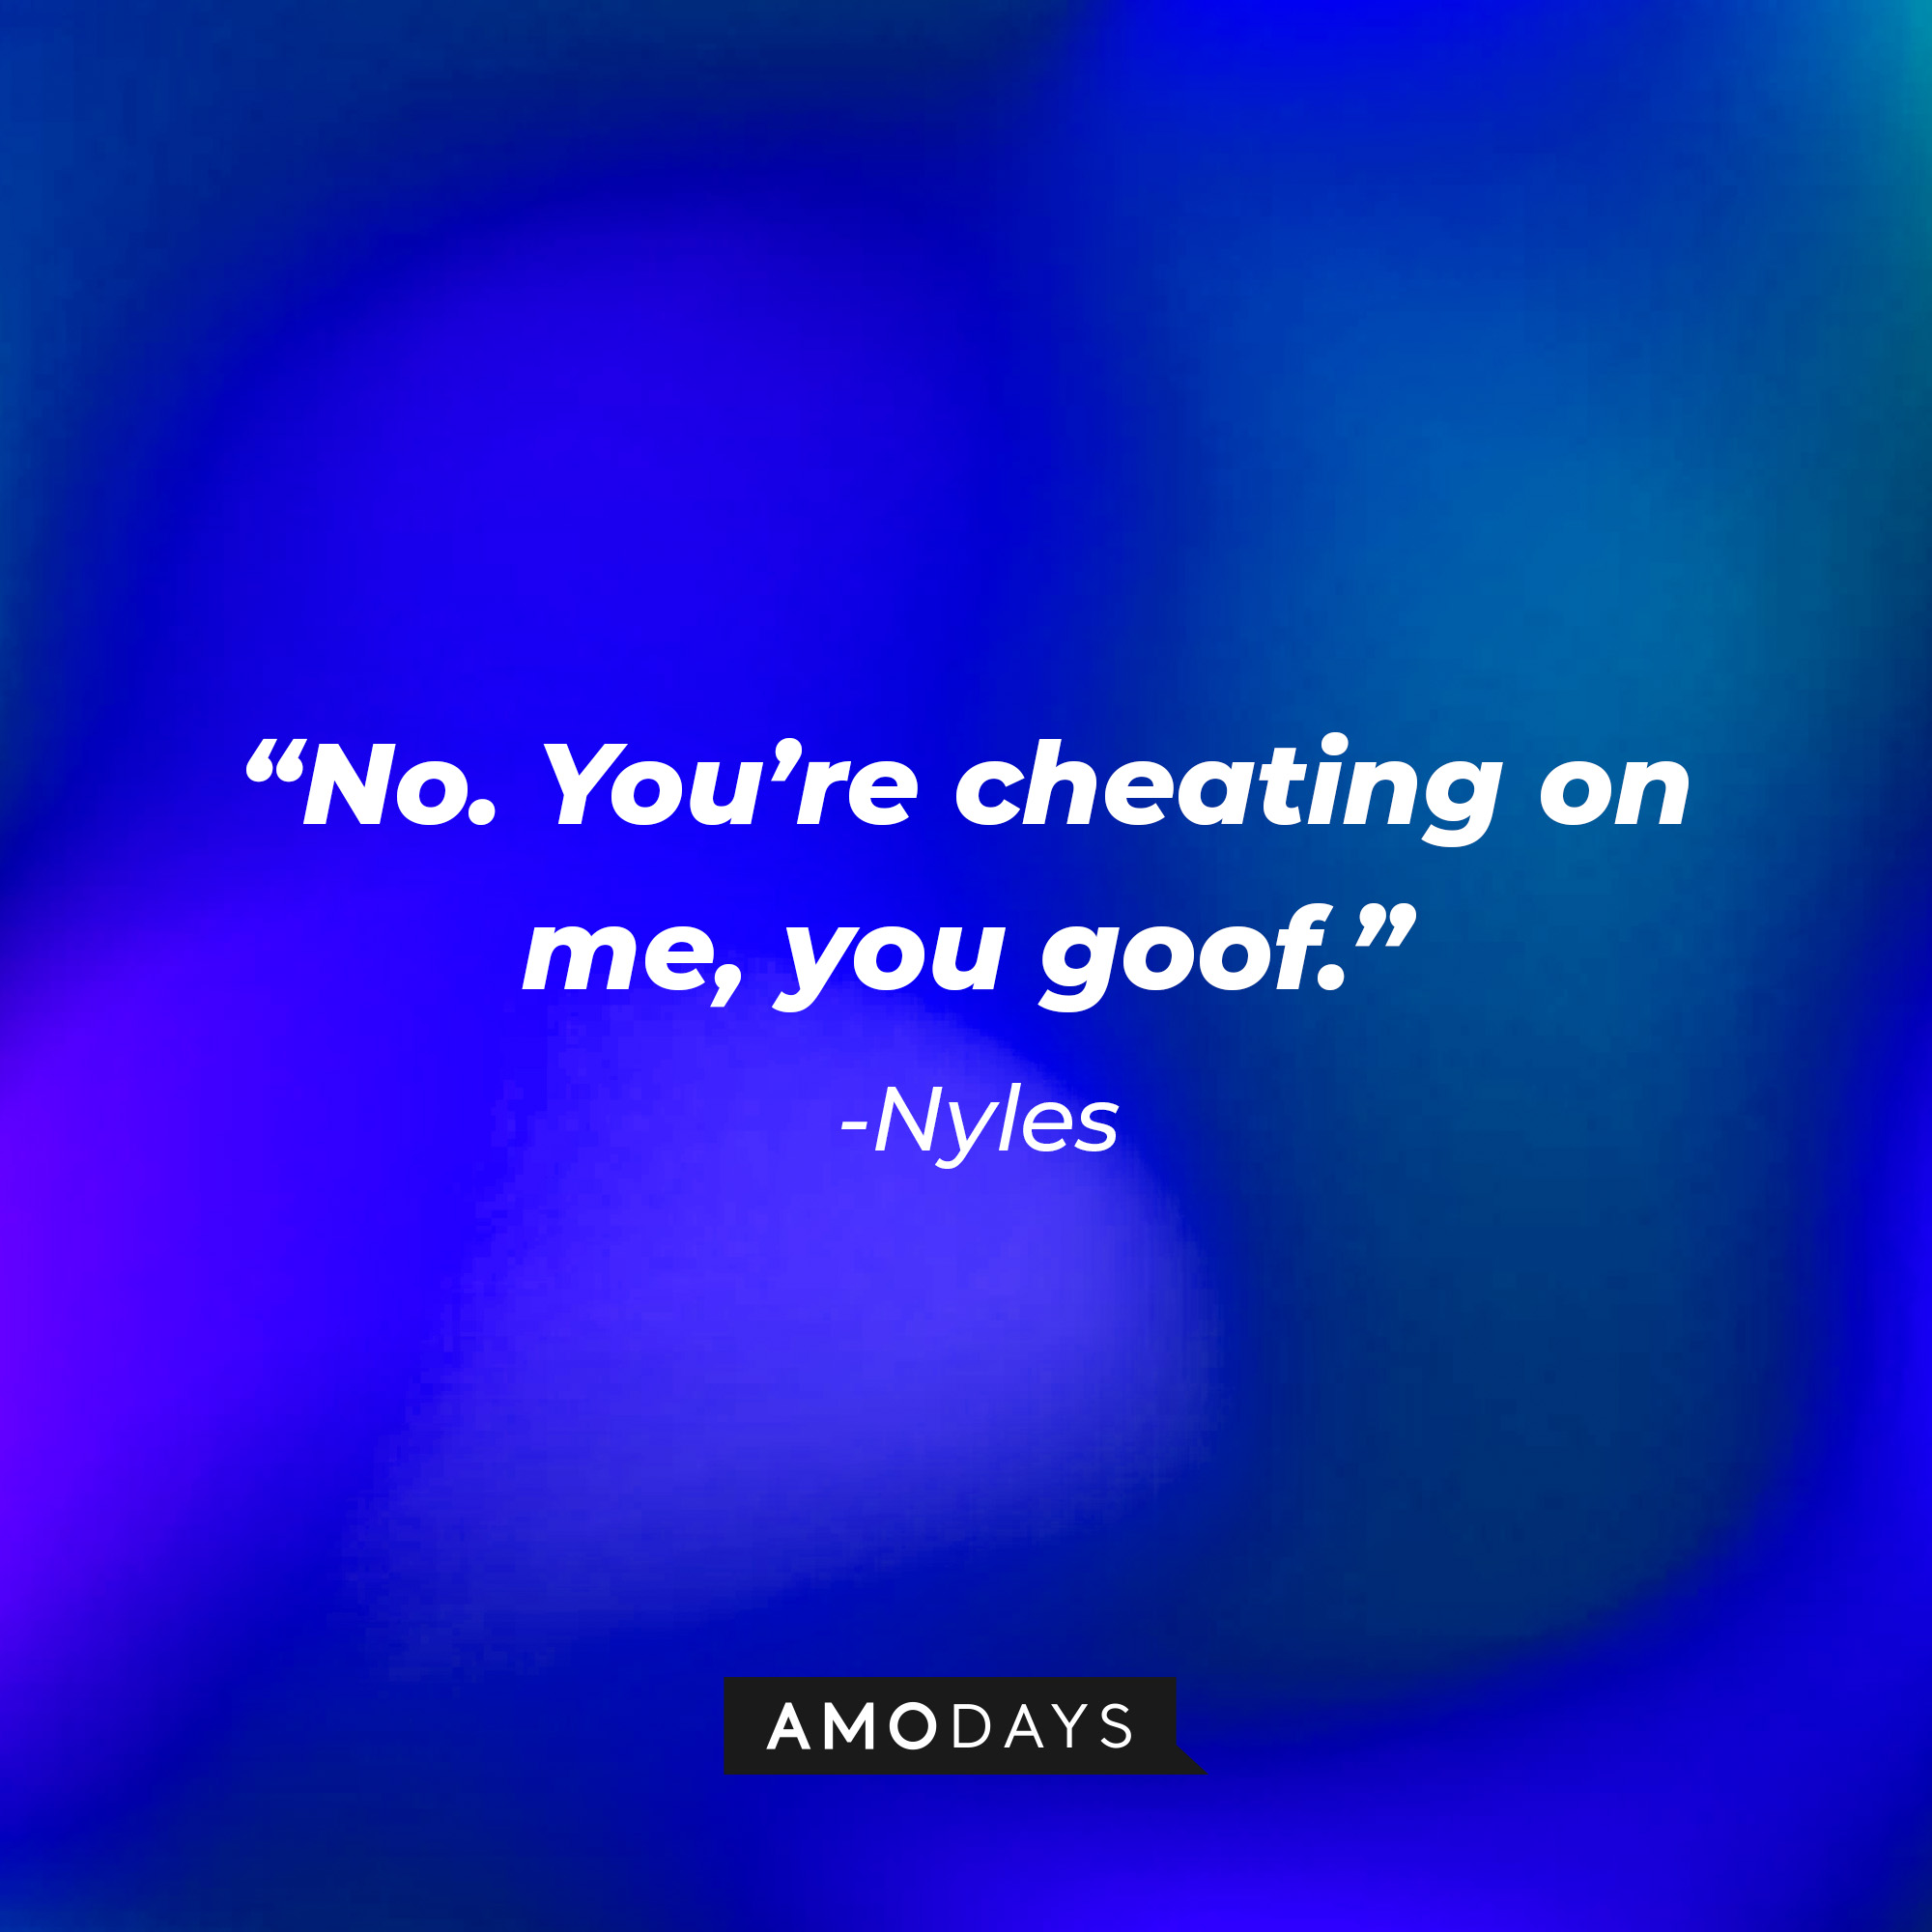 Nyles’ quote: "No. You’re cheating on me, you goof." │ Source: AmoDays